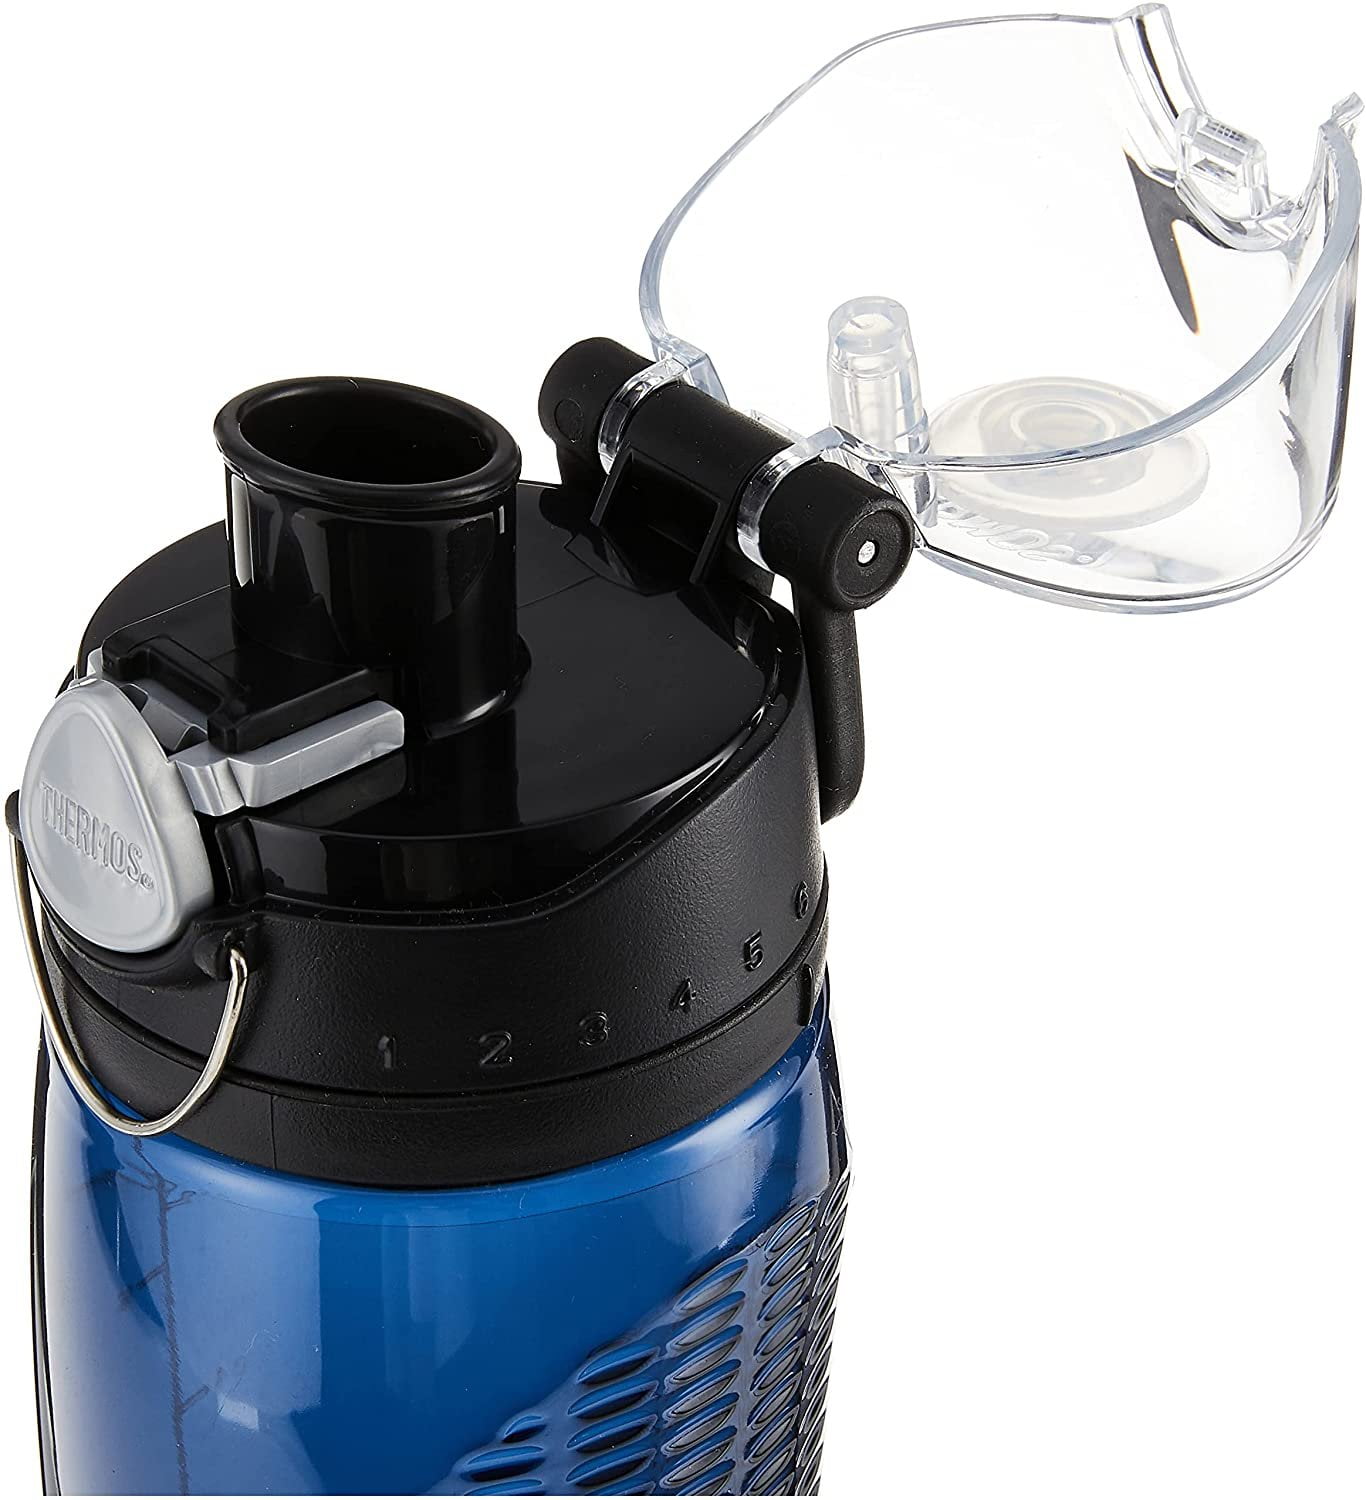 Thermos Hydration Bottle with Meter, Midnight Blue, 24 Ounce